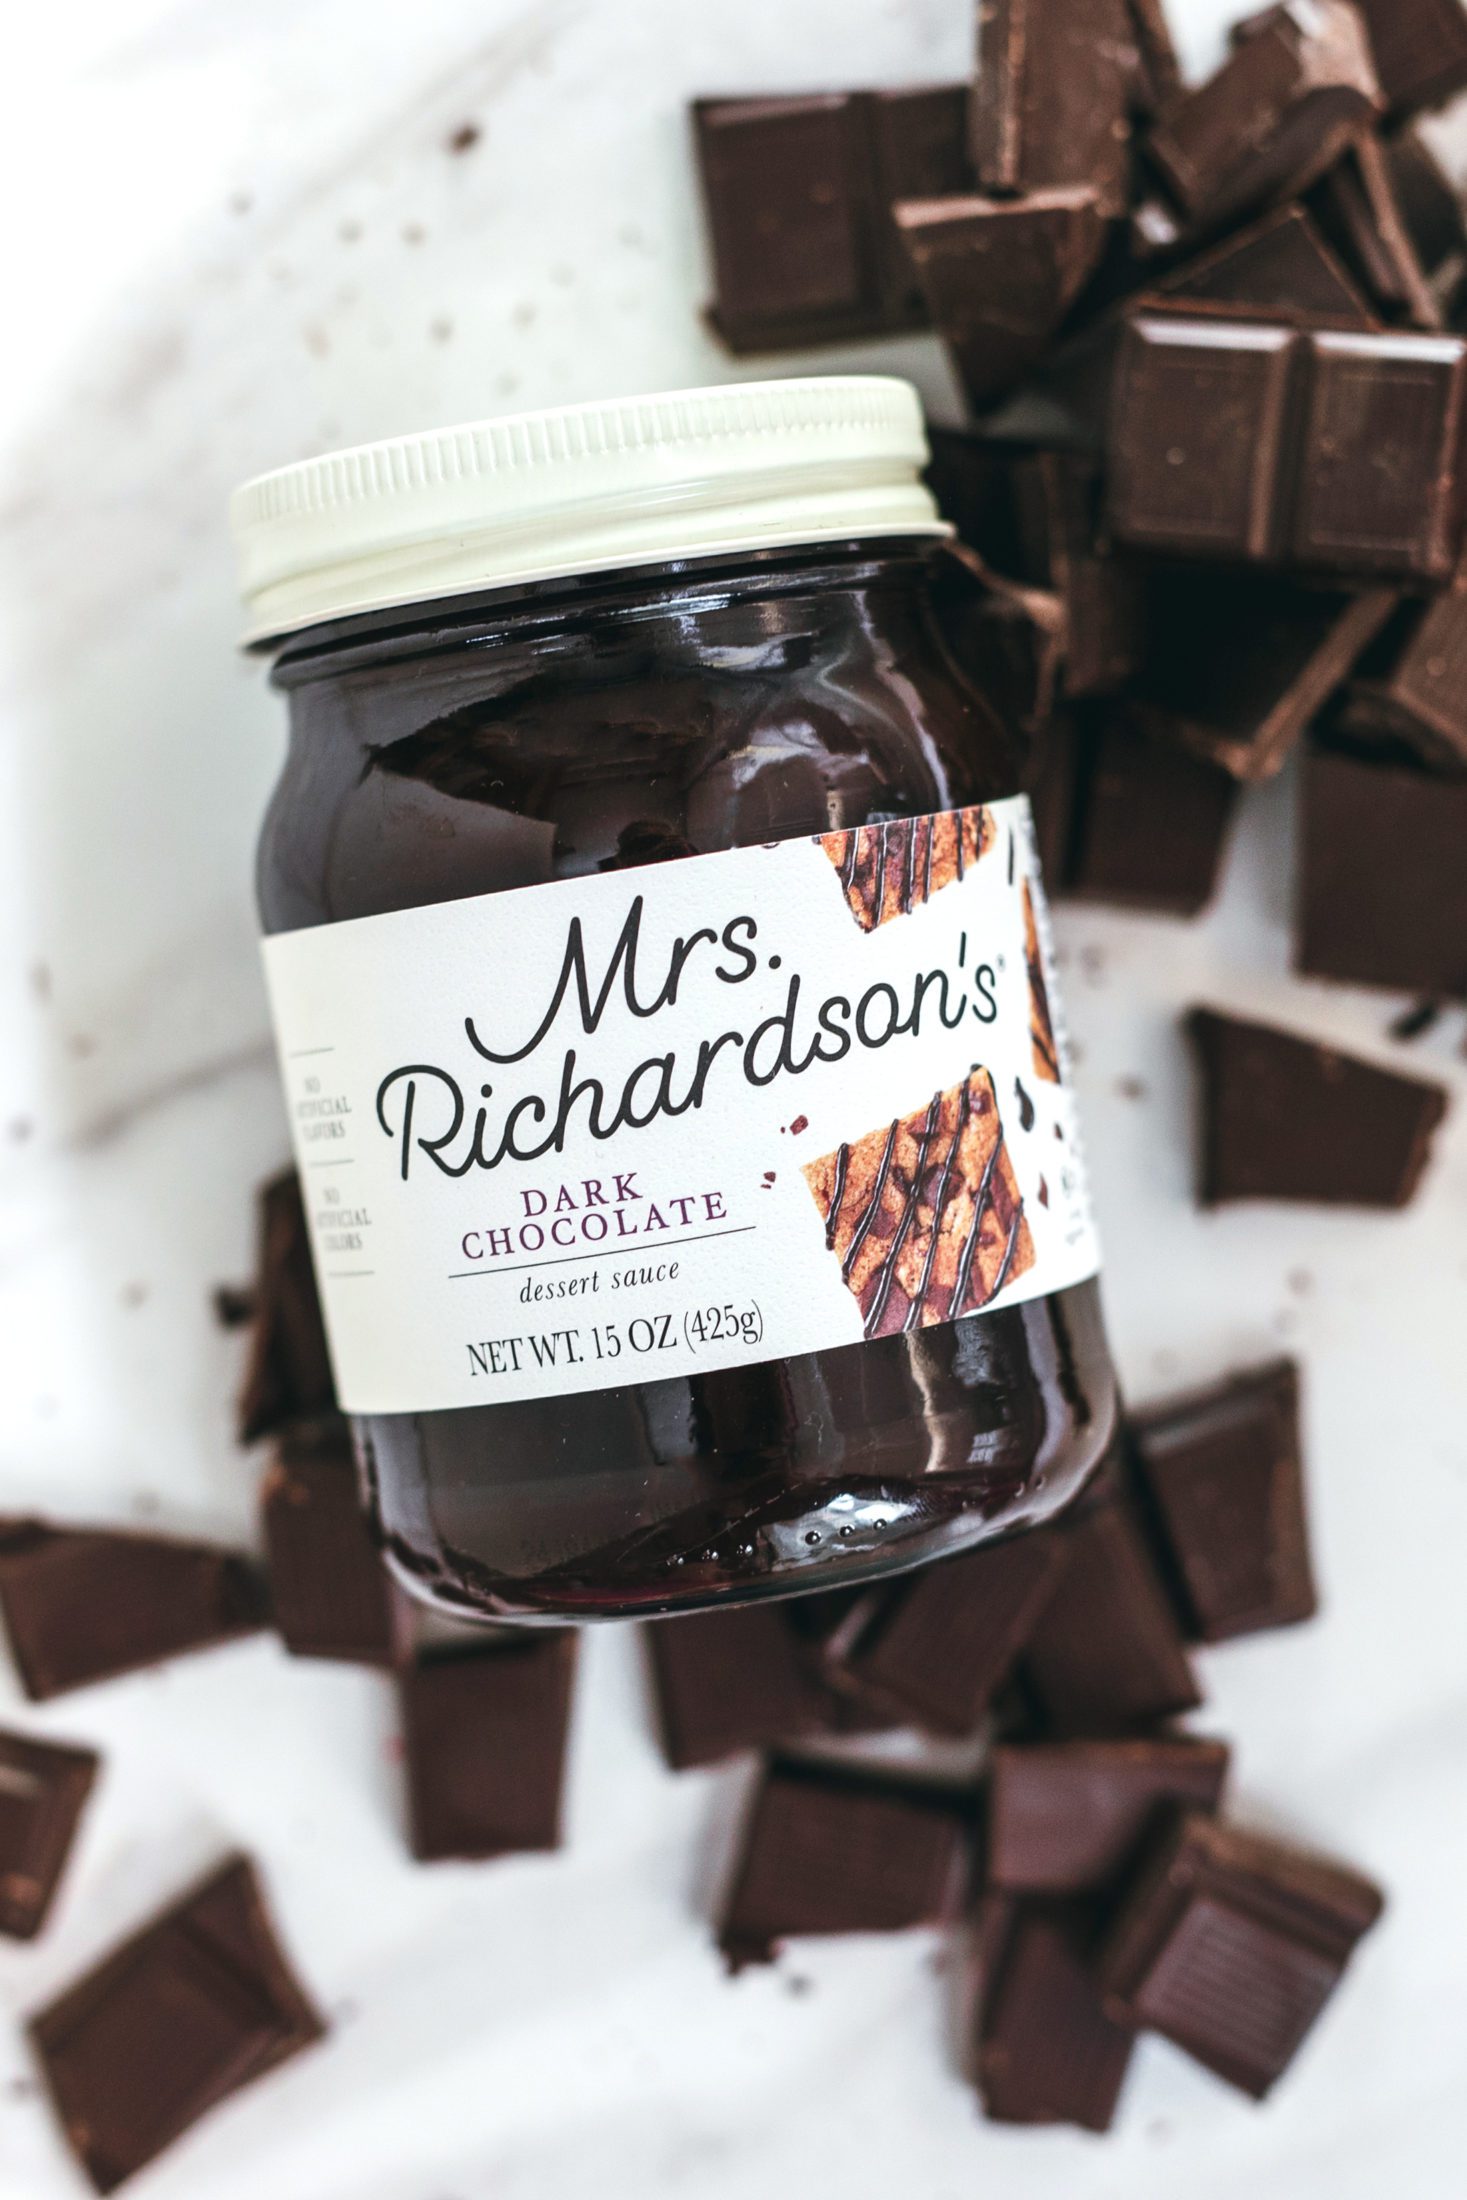 An overhead view of new Mrs. Richardson's cream label design using a clear glass jar with cream white lid. Dark Chocolate dessert sauce jar with chopped chocolate pieces on a marble surface.